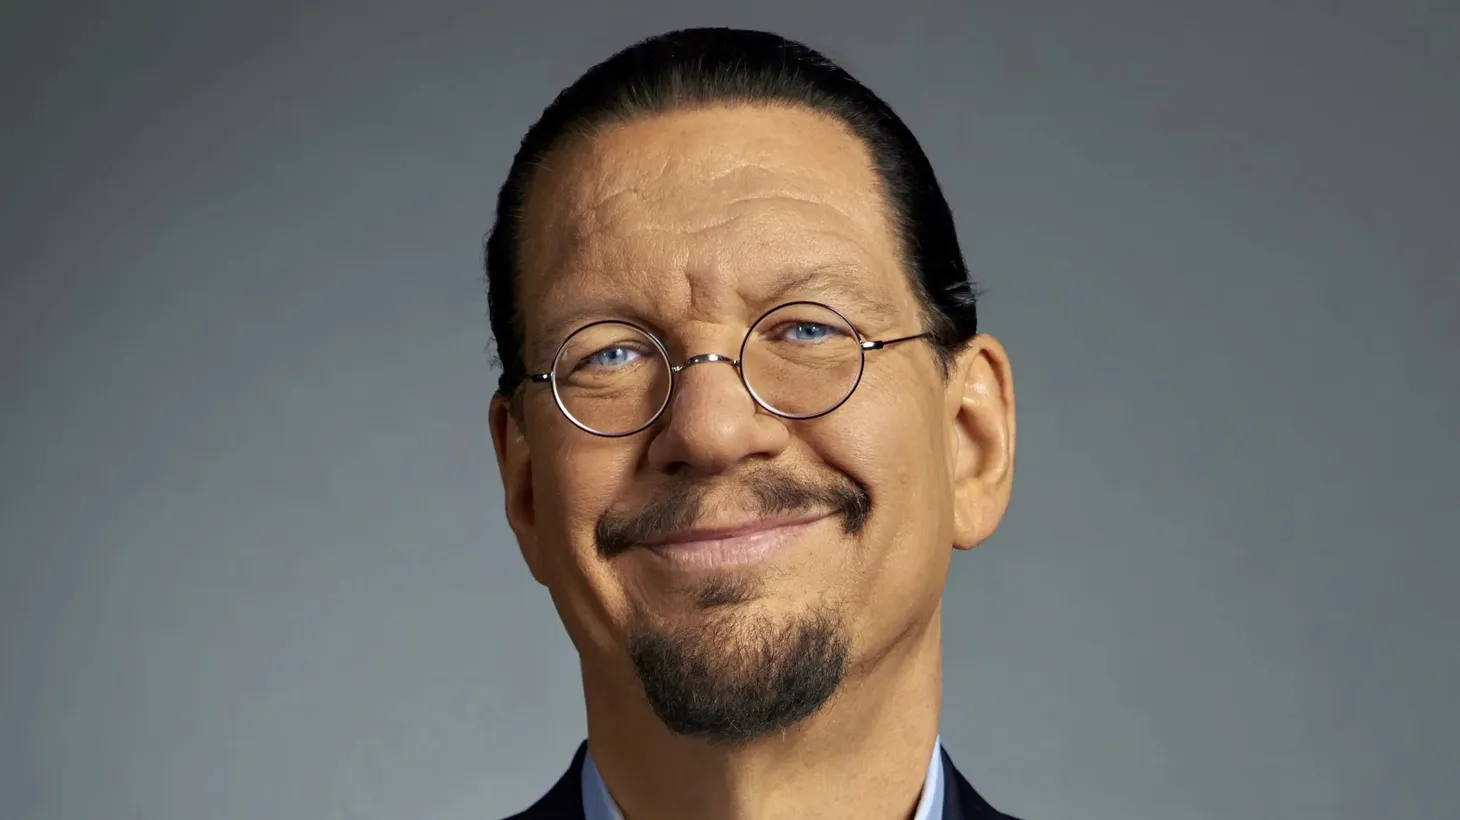 “Whenever you start losing faith in people, the cure for that is to be around people. There's nobody on the streets of Manhattan that won't help you if you have real trouble. It really happens. But we have gotten this idea of evil deep into people's minds. And it doesn't matter what side you're on,” says Penn Jillette.